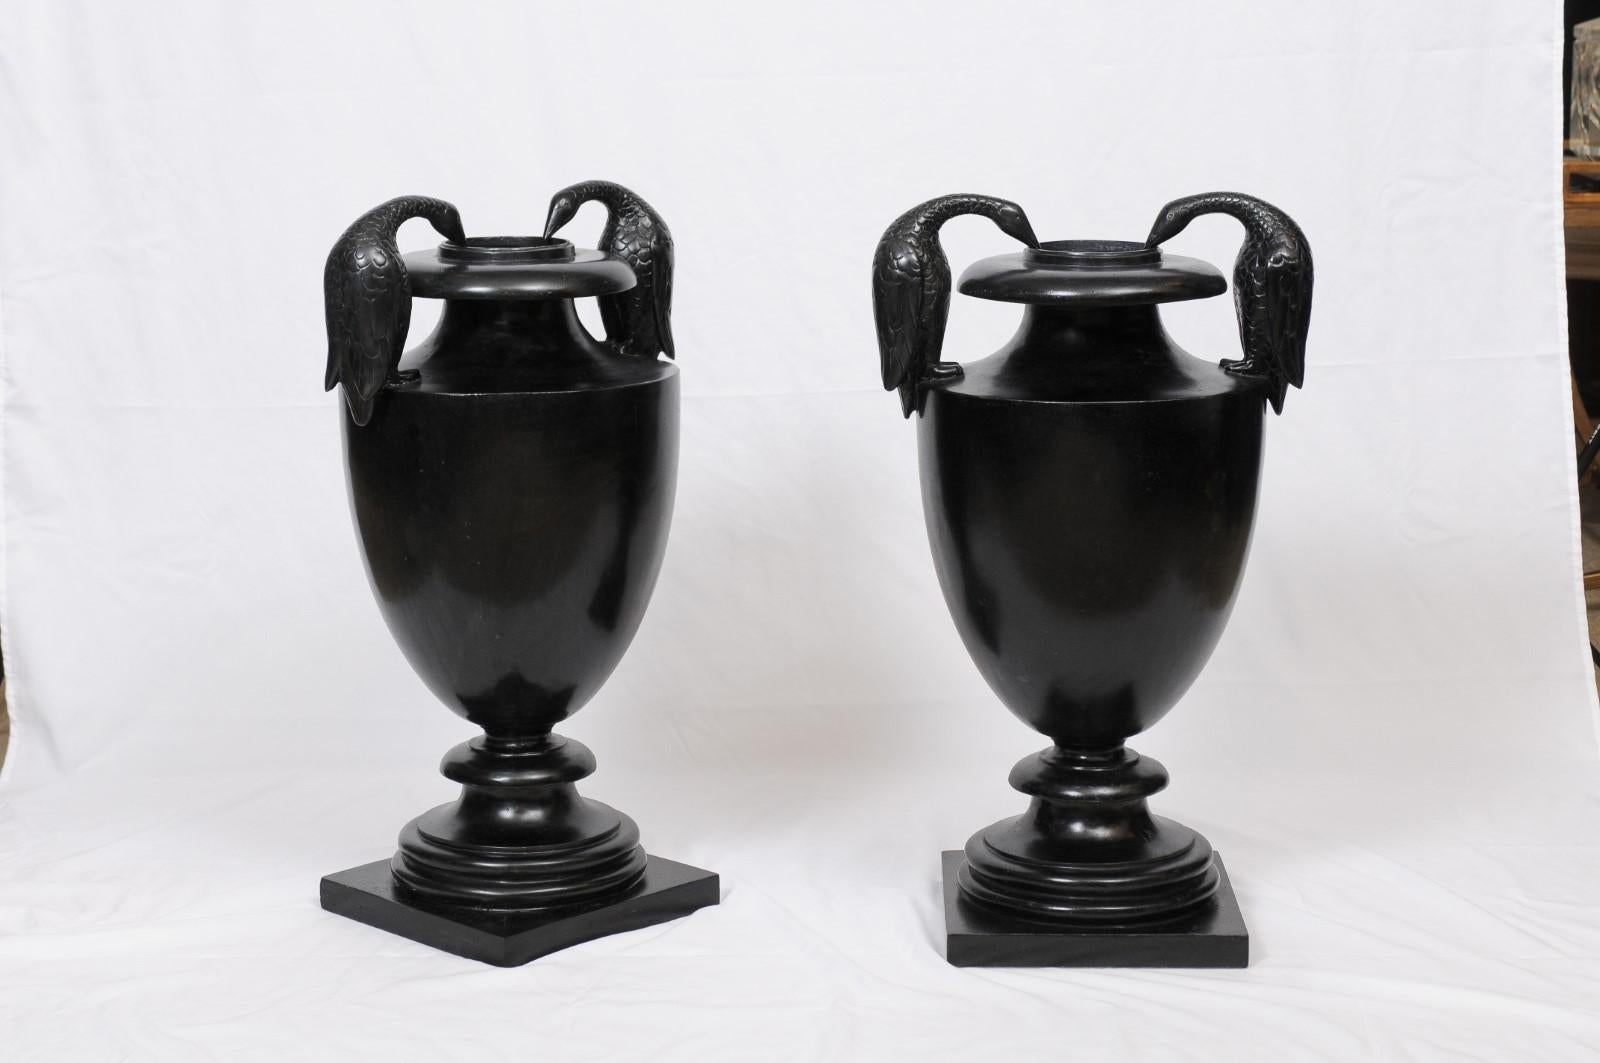 This urn has a classical shape and creates the perfect silhouette with the cormorant handles. Crushed black wax stone makes a strong visual image.